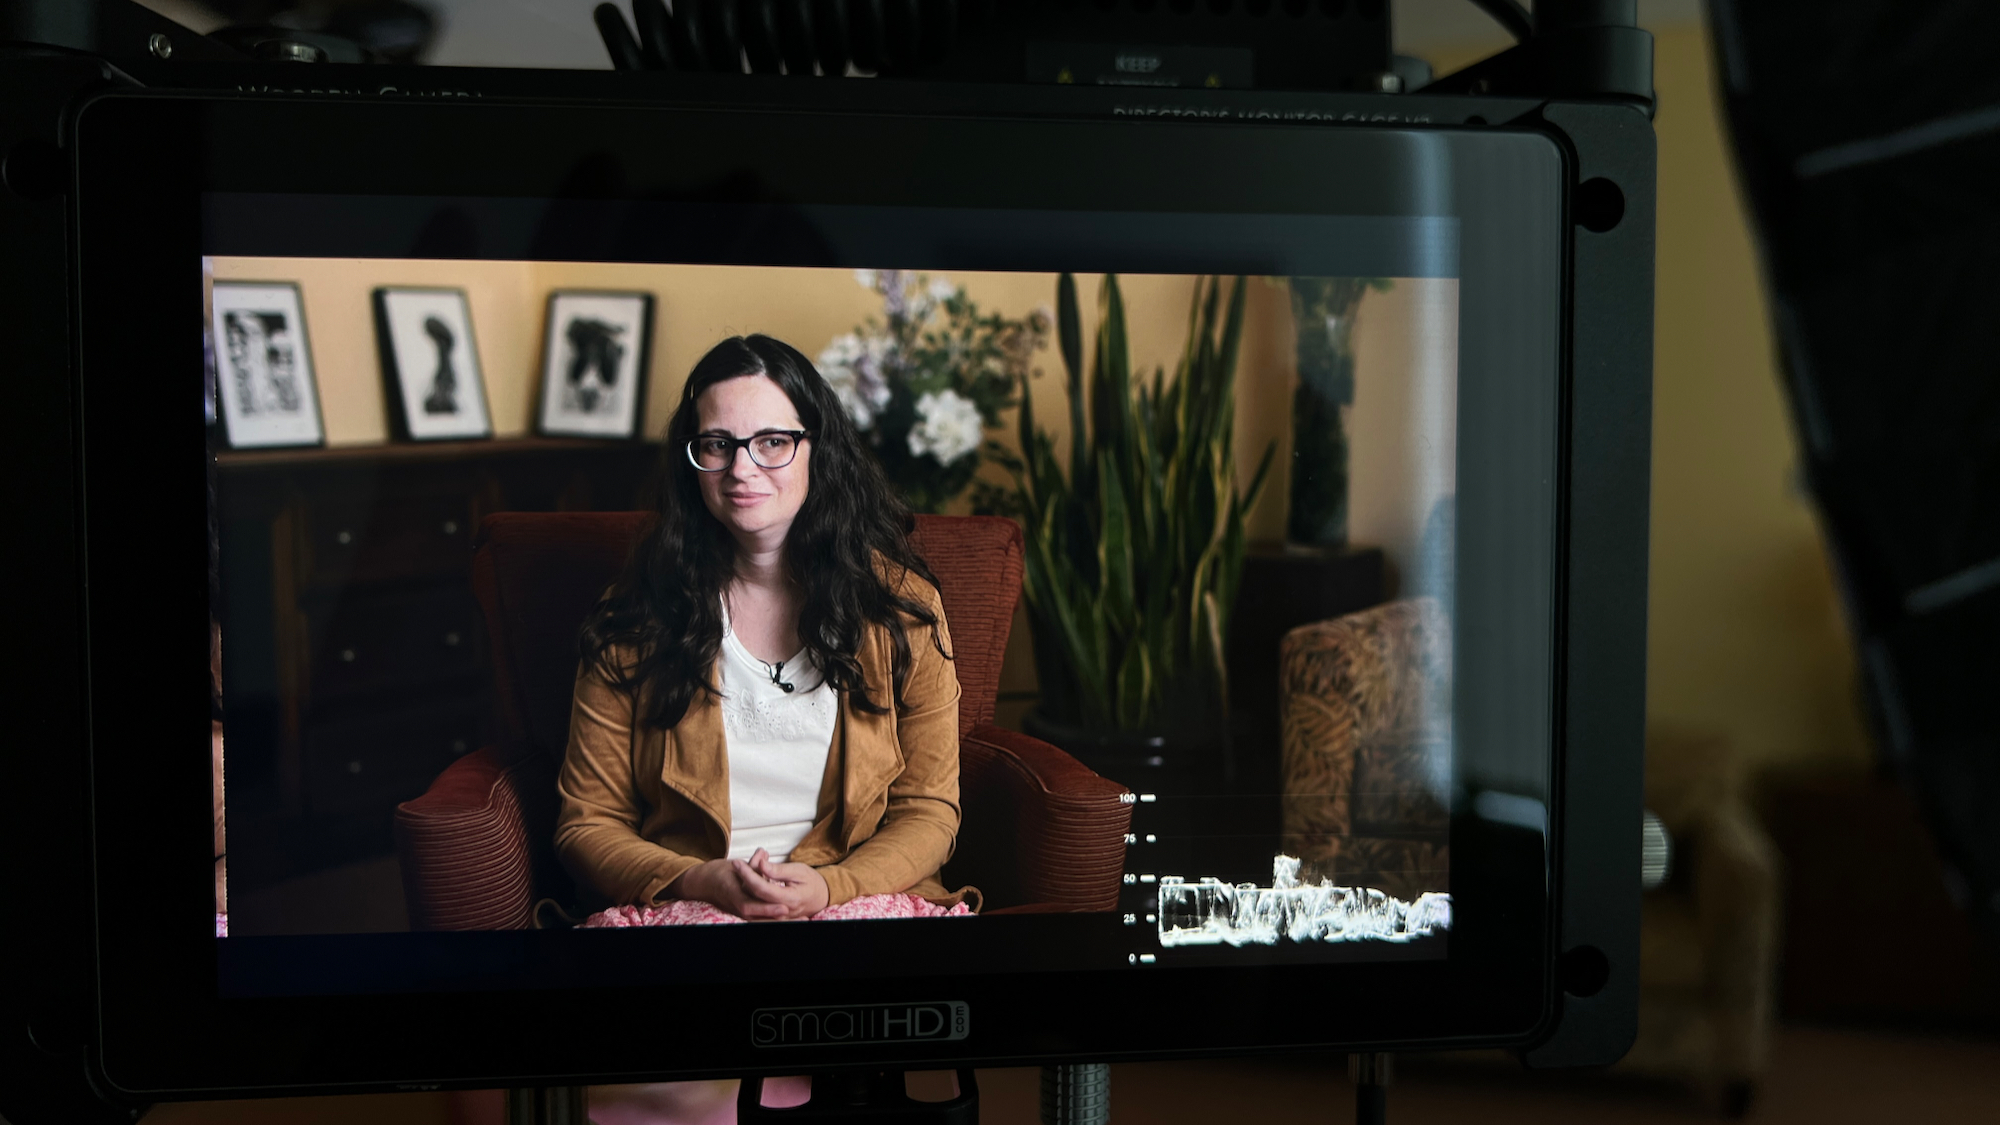 Monitor shot of a woman with glasses being interviewed in a yellow colored room with large green plants.